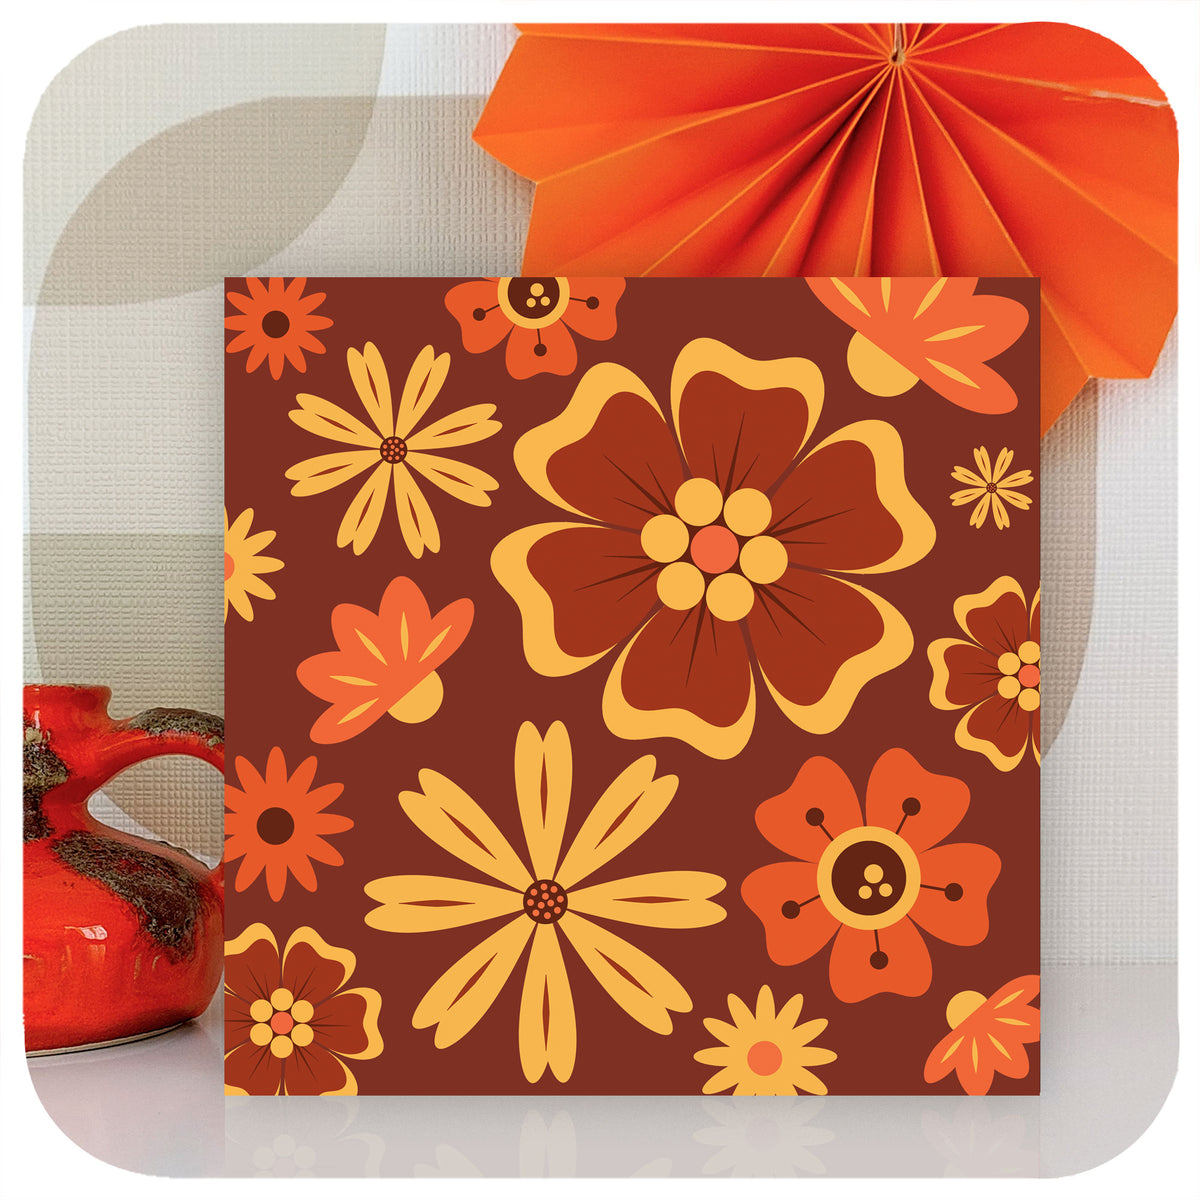 A greetings card with 70s style brown, orange and yellow flowers stands with a small vintage vase and a paper decoration | The Inkabilly Emporium